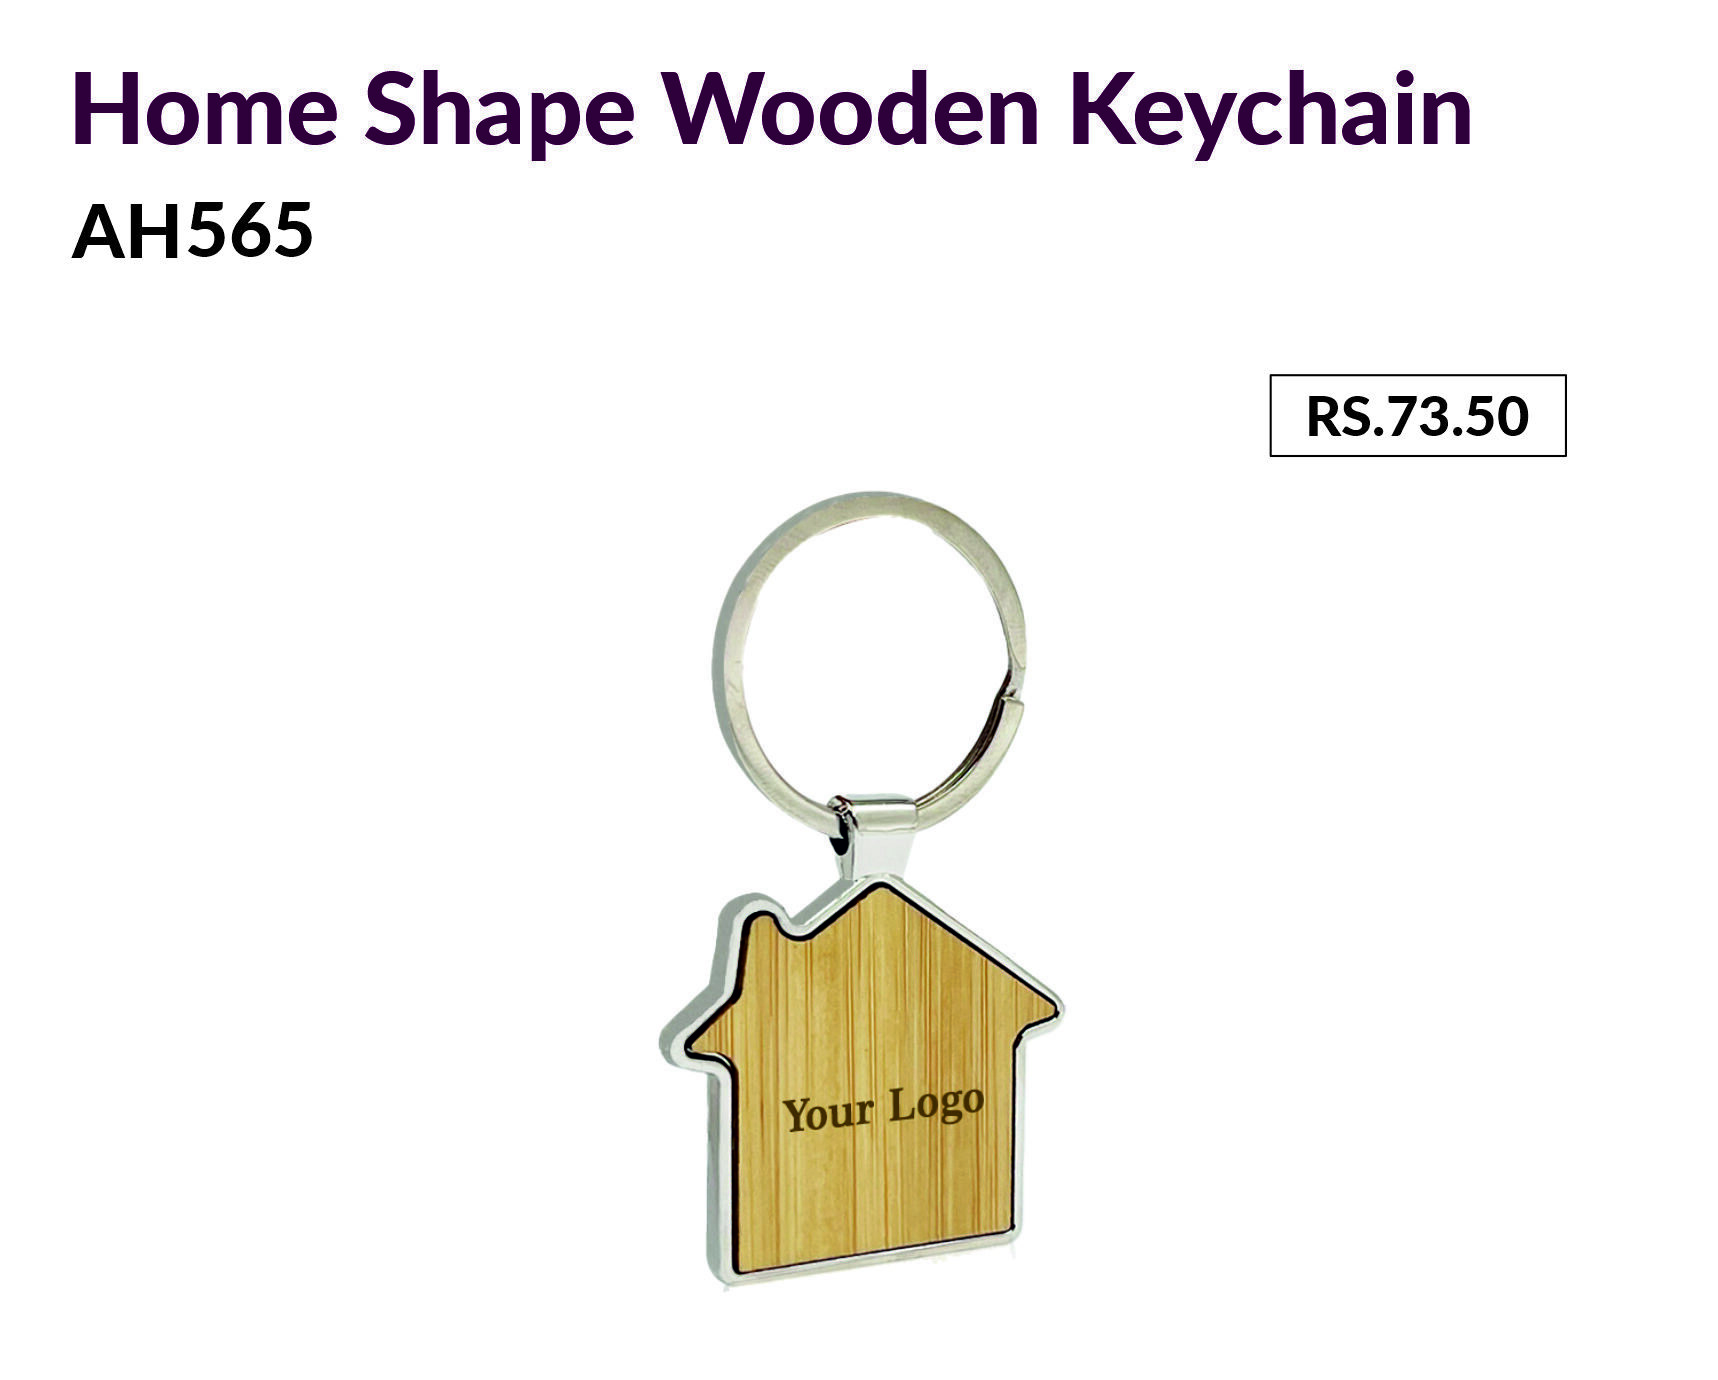 Home Shape Wooden Keychain